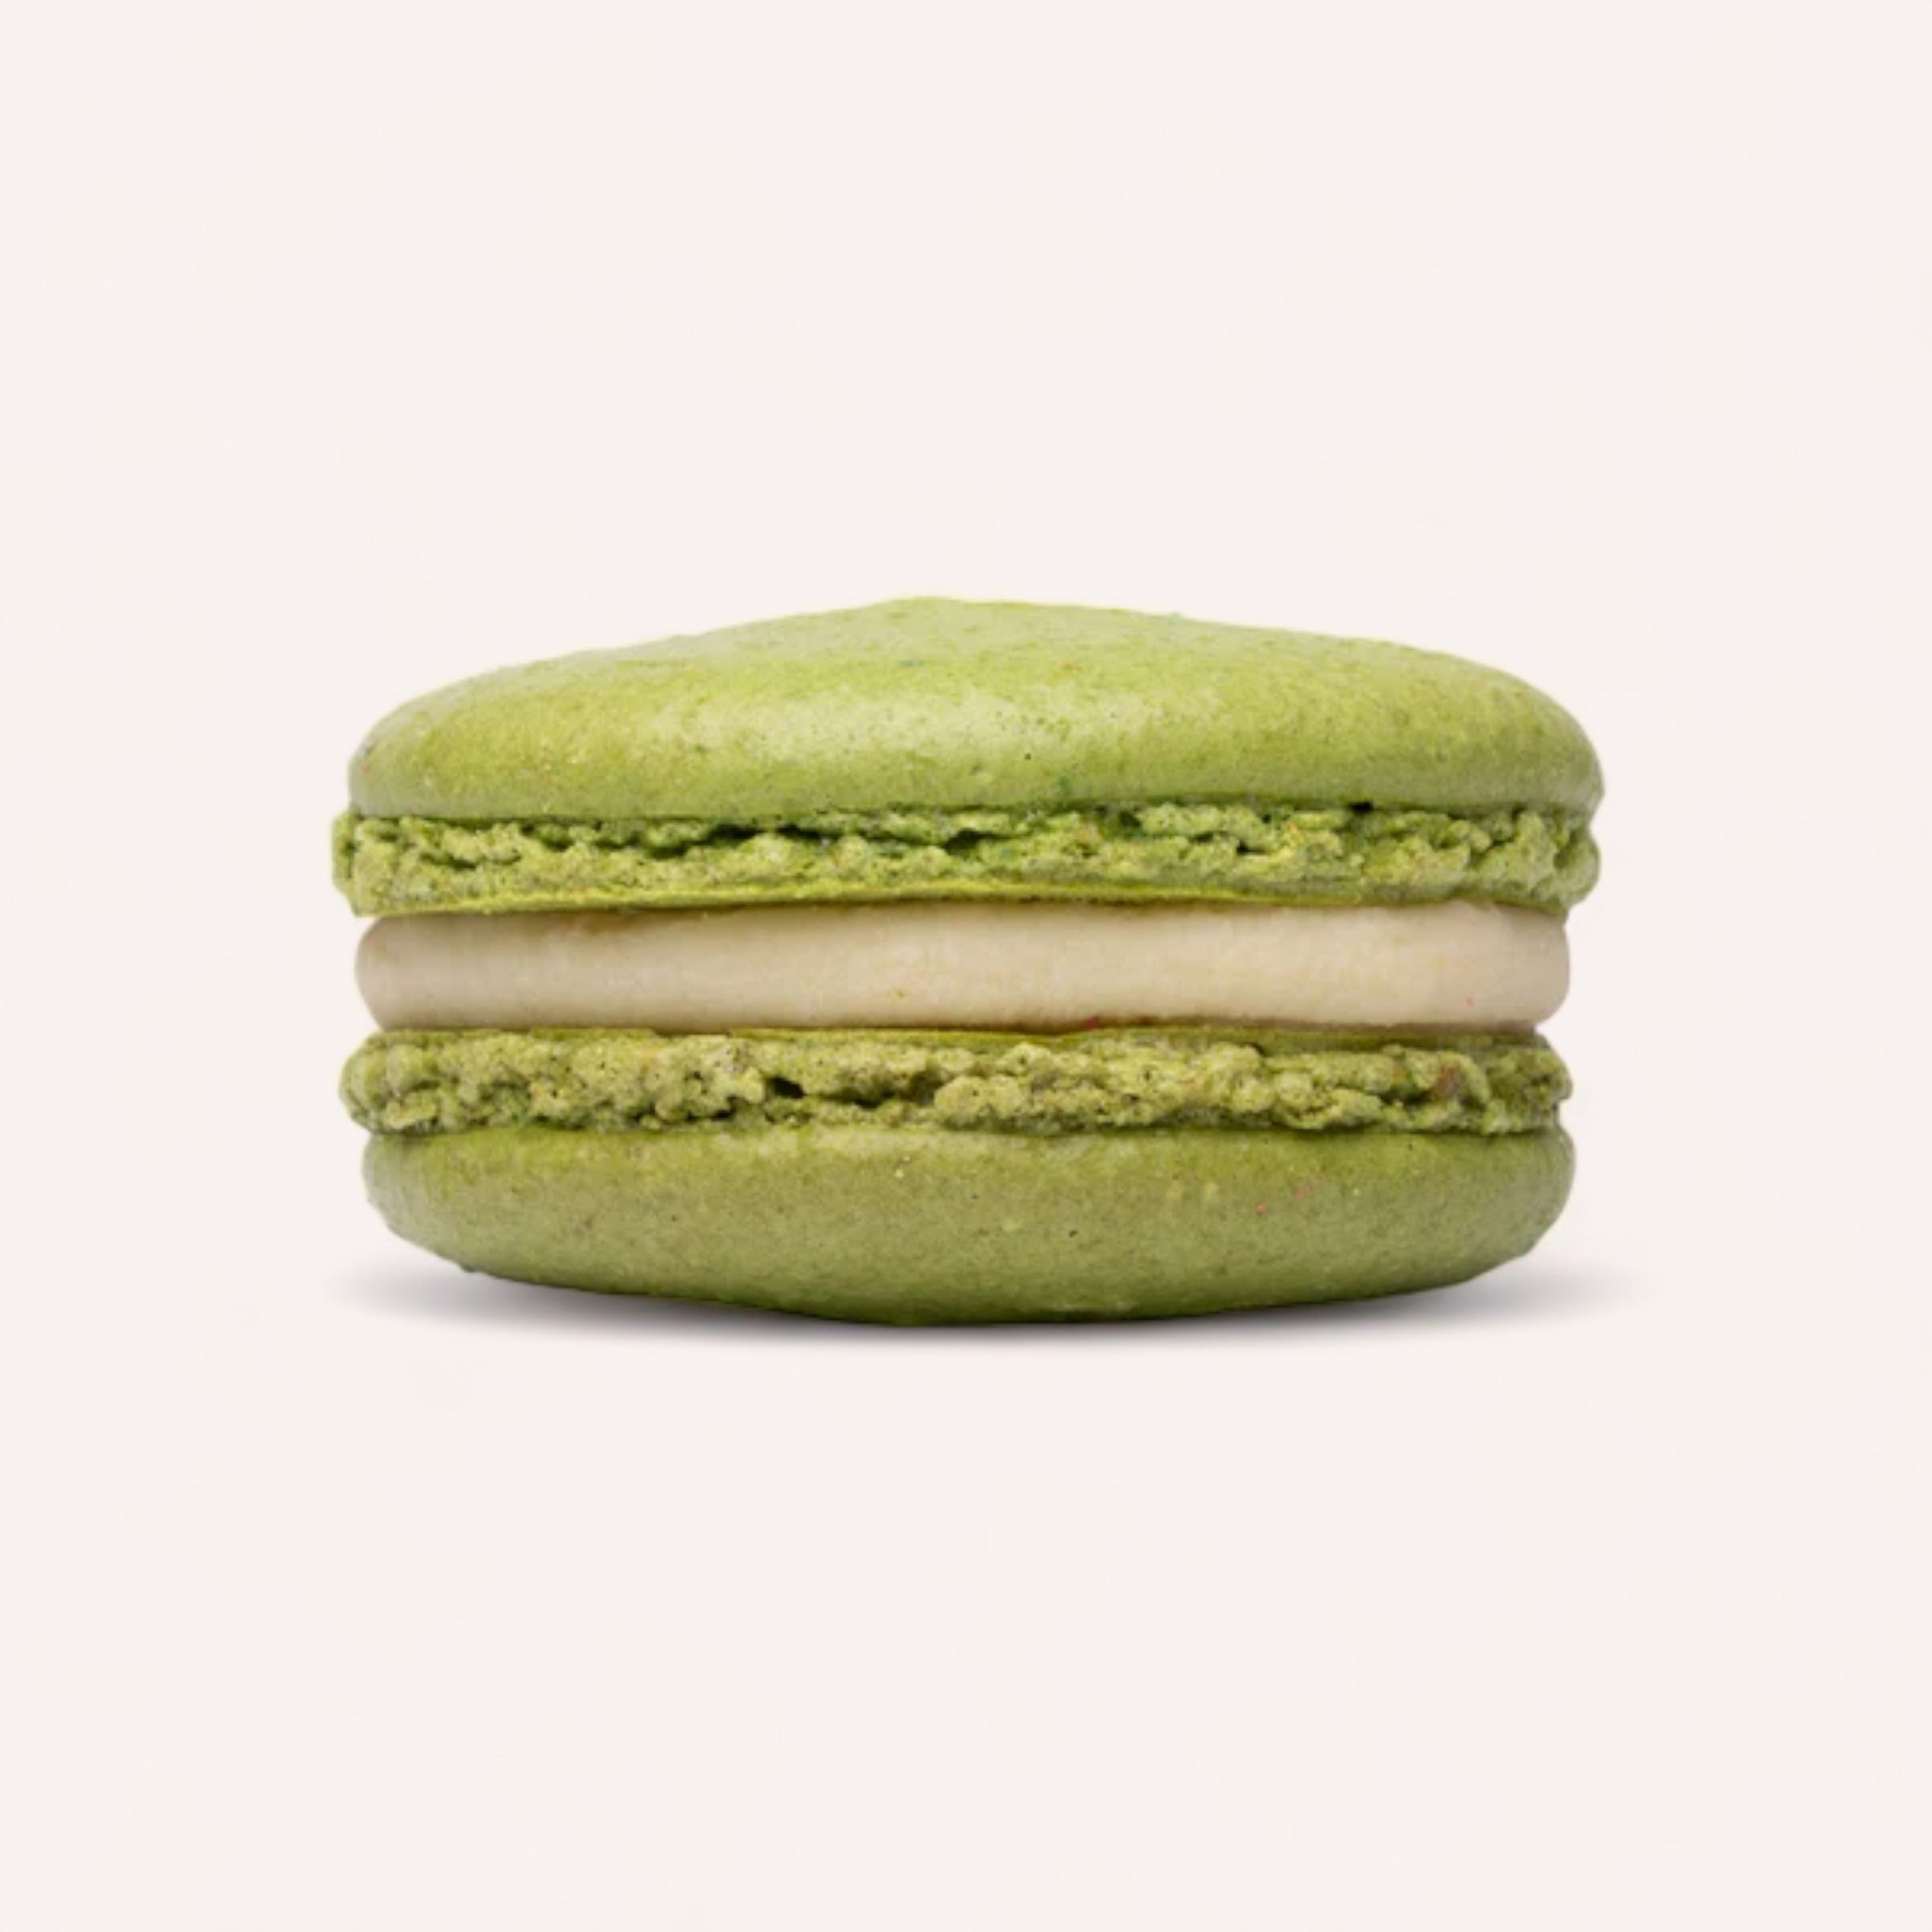 A single green handmade J'aime les Macarons with a creamy filling, centered against a white background in Christchurch, New Zealand.